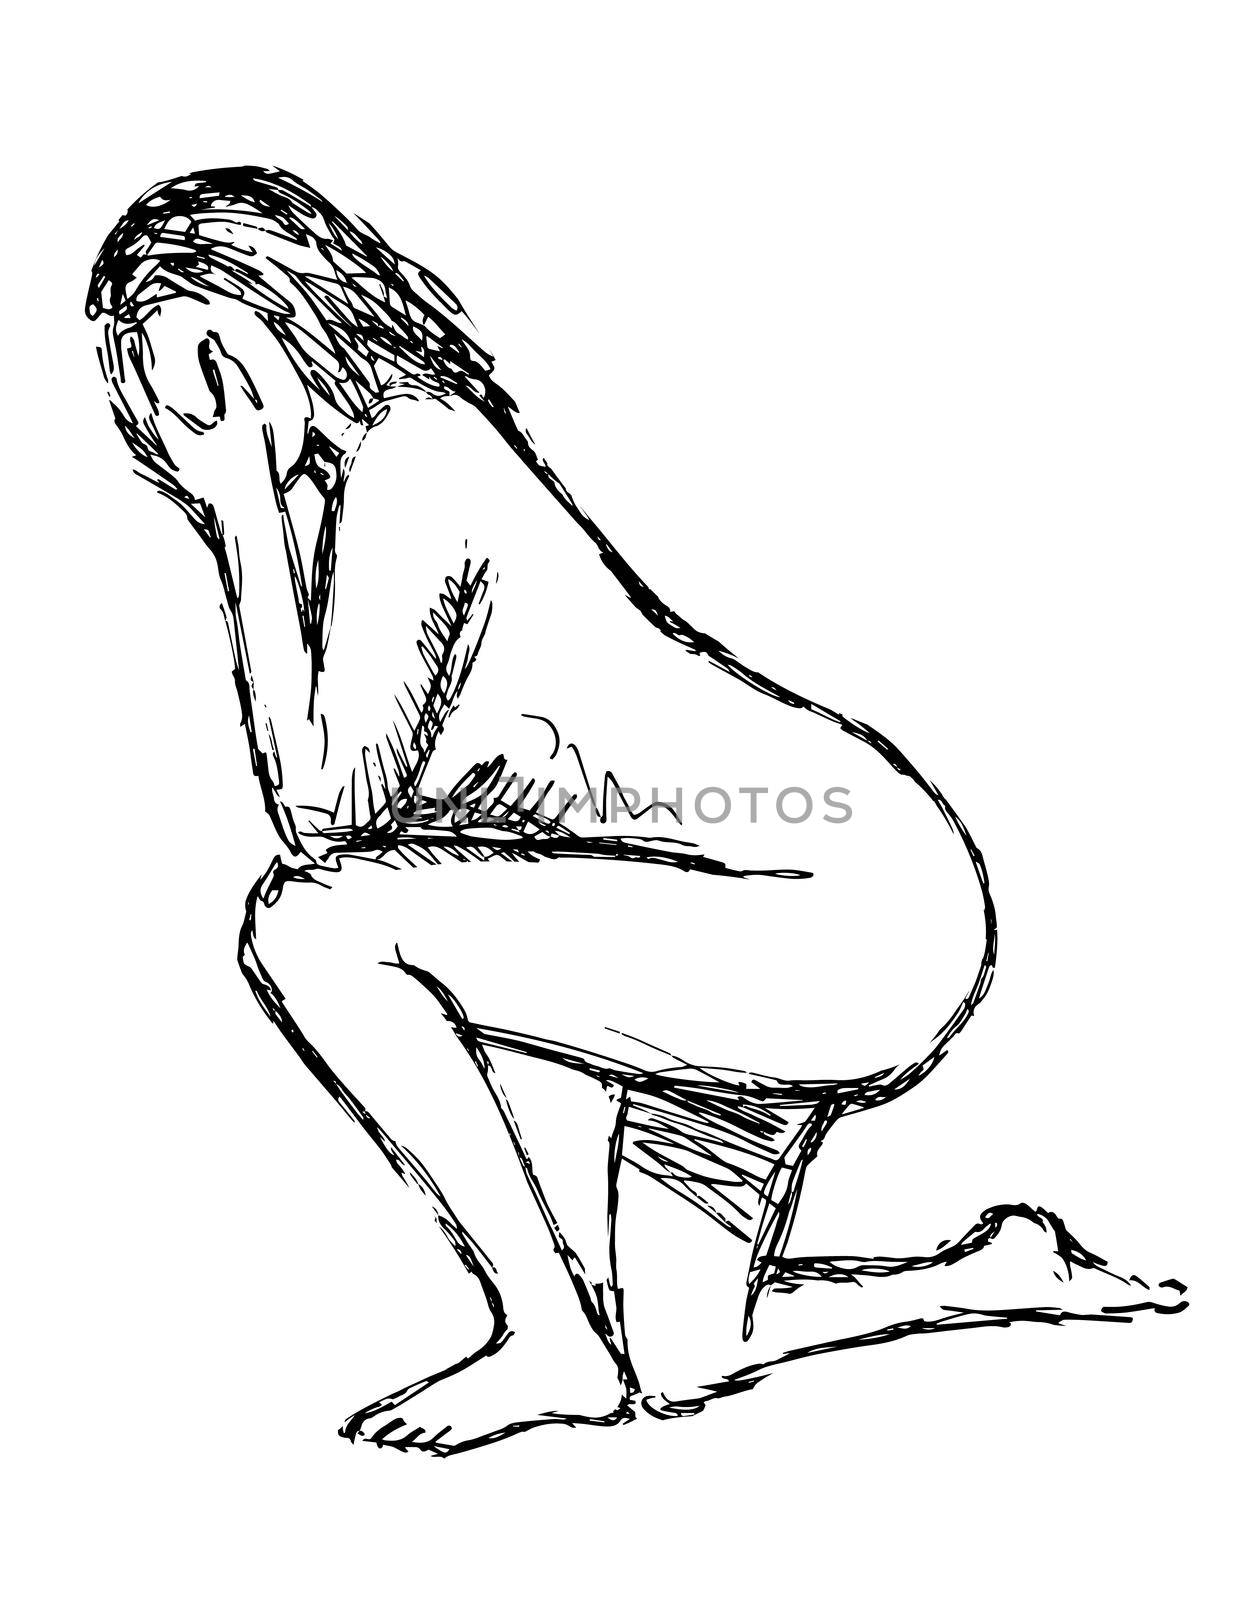 Doodle art illustration of a nude female human figure posing Kneeling on One Knee With Hand Covering Face done in line drawing style in black and white on isolated background.